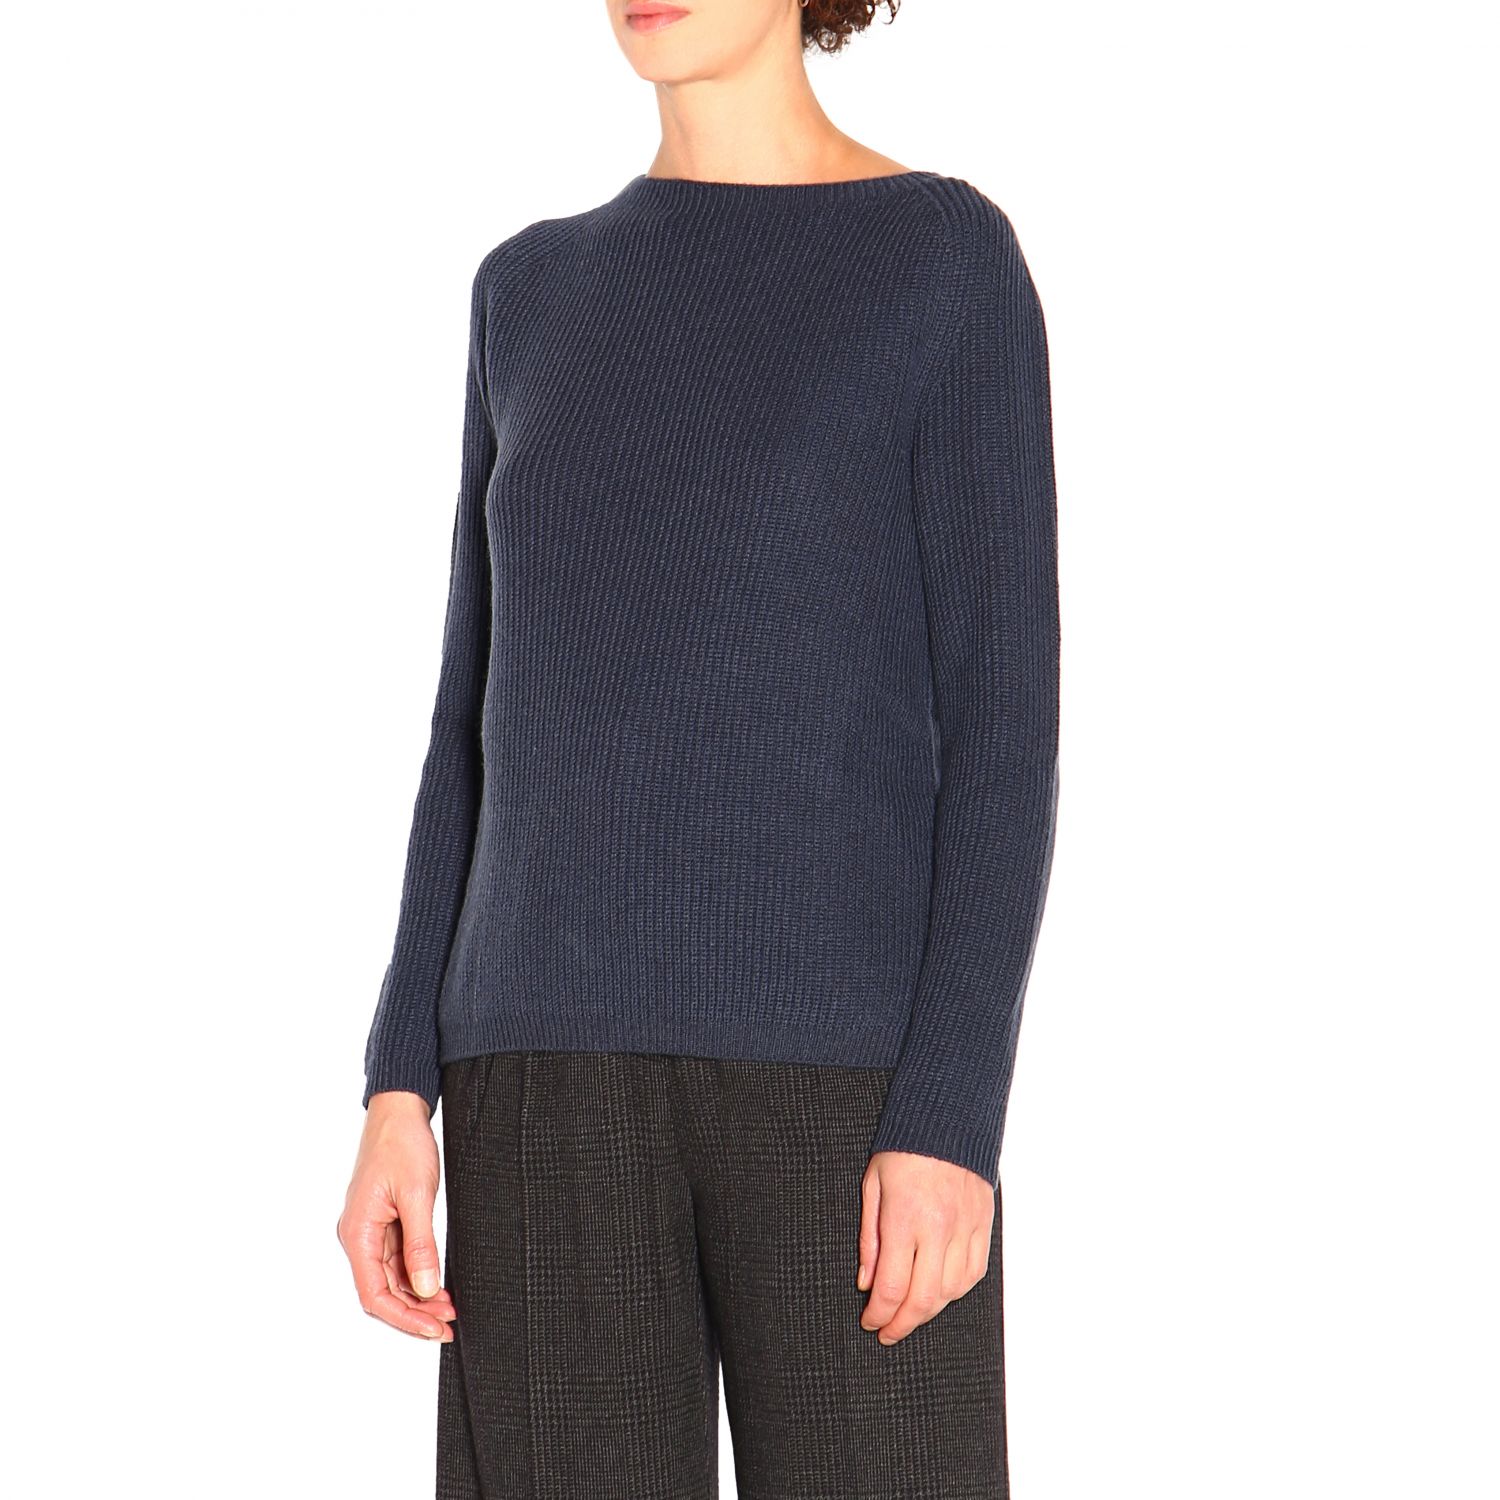 S Max Mara Outlet: sweater for woman - Blue | S Max Mara sweater ...